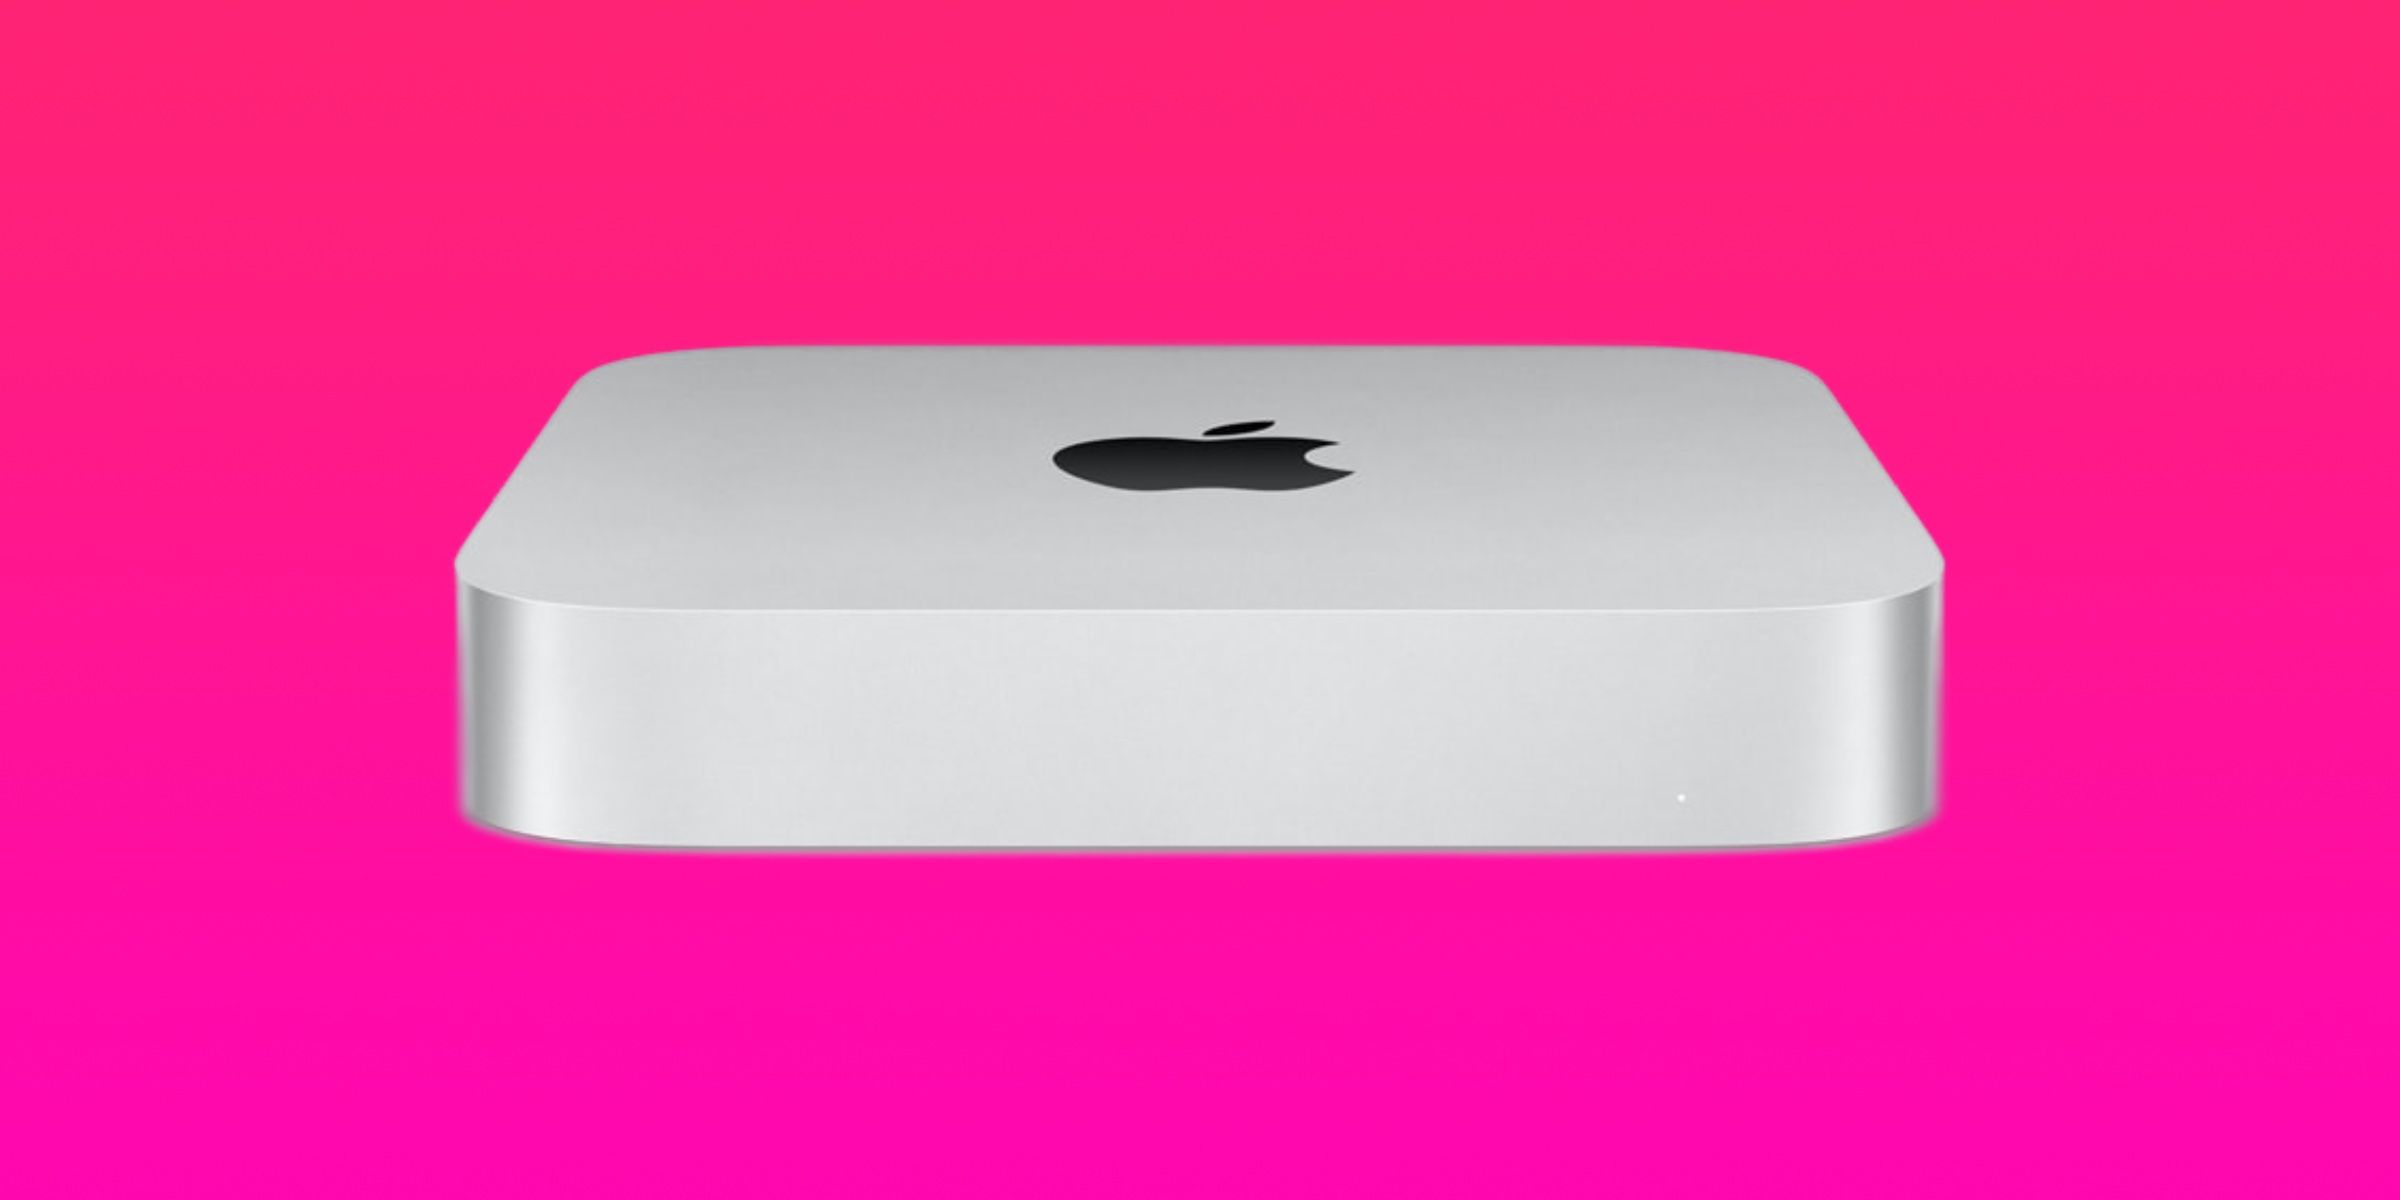 An M2-powered Mac mini against a pink gradient background.